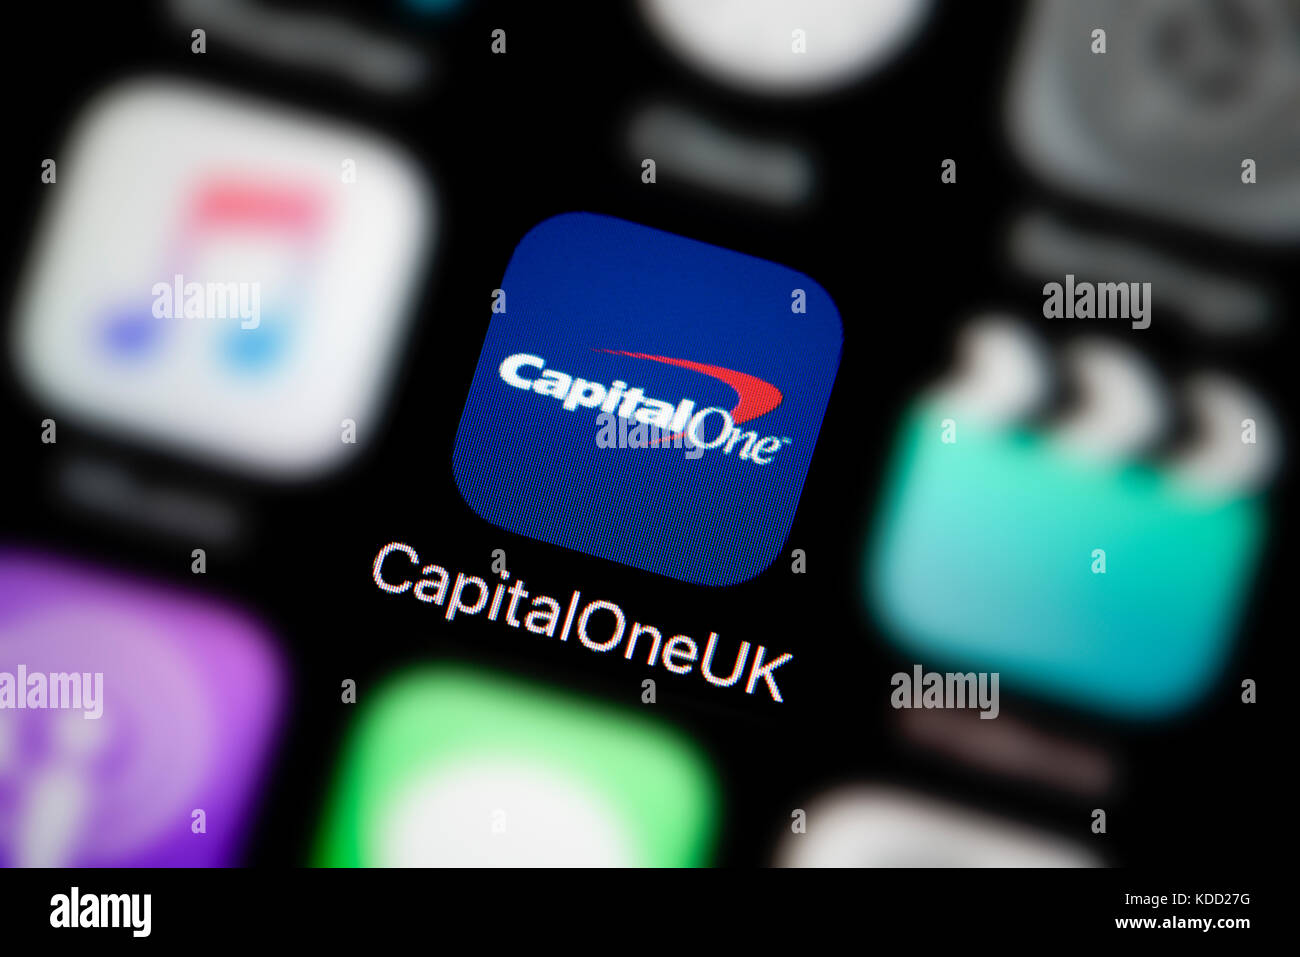 A close-up shot of the logo representing Capital One UK app icon, as seen on the screen of a smart phone (Editorial use only) Stock Photo